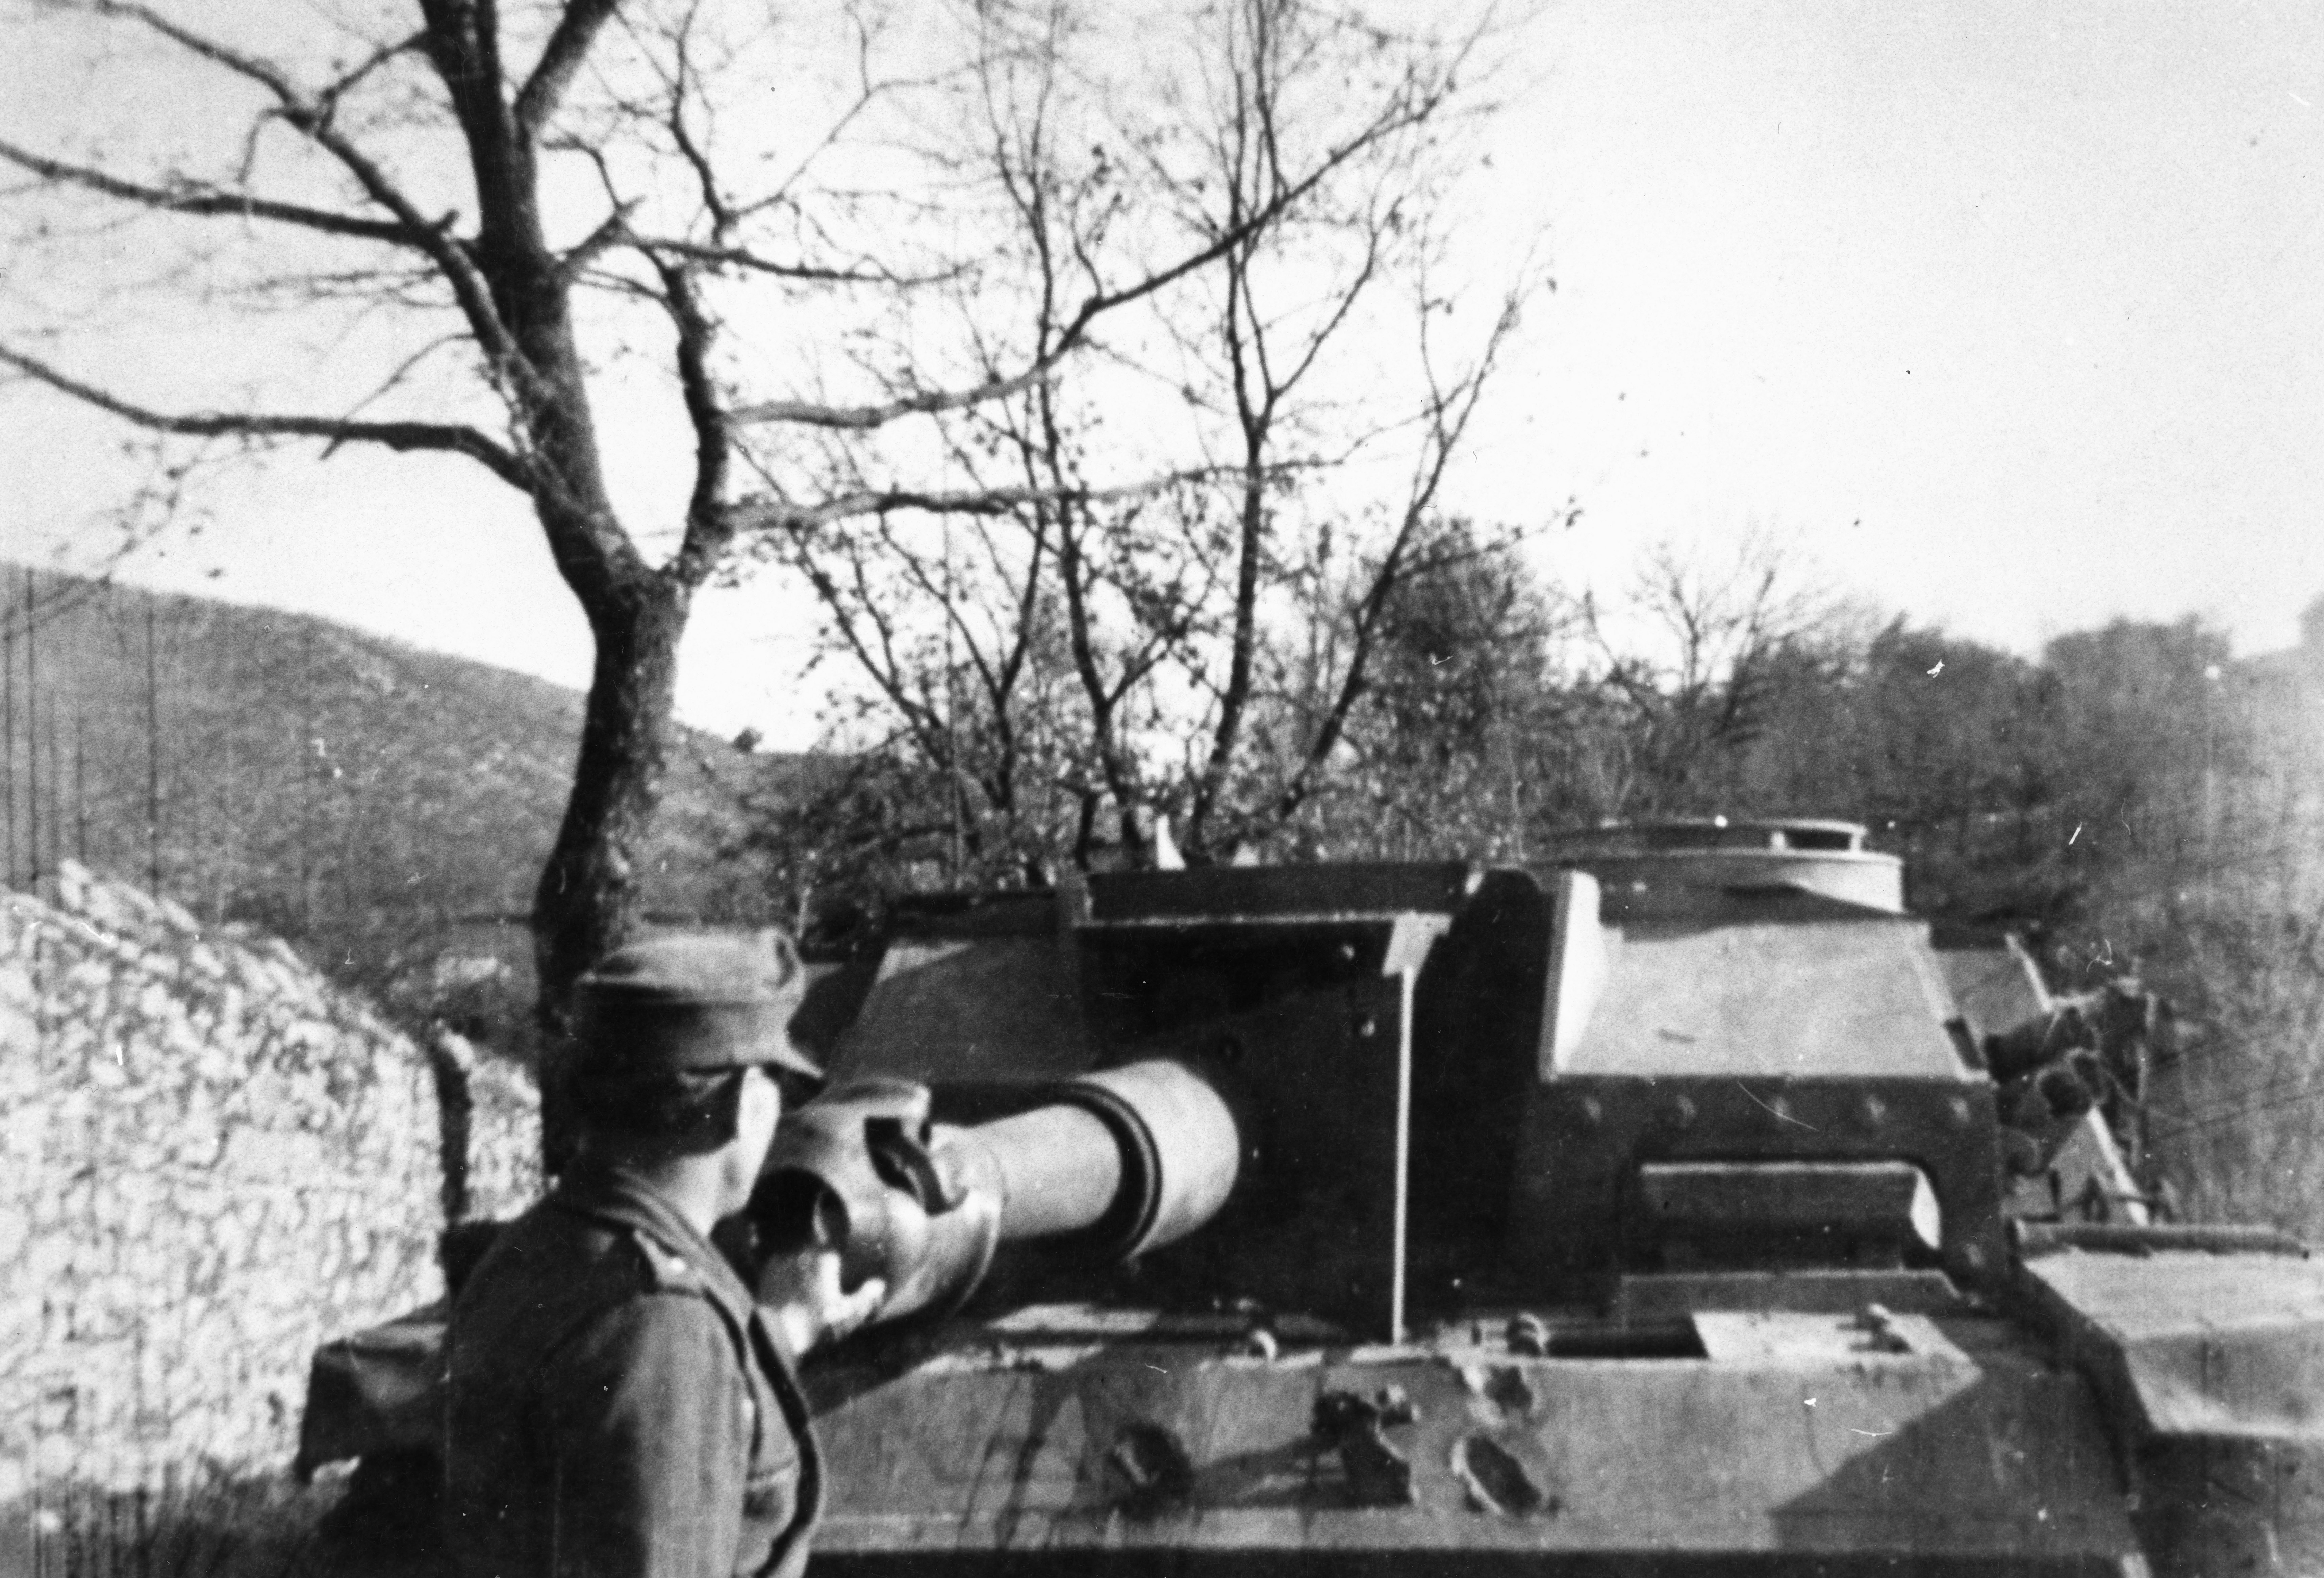 <p class='eng'>The damaged StuH III from 3. Batterie, which I believe was south of Cassino.</p>